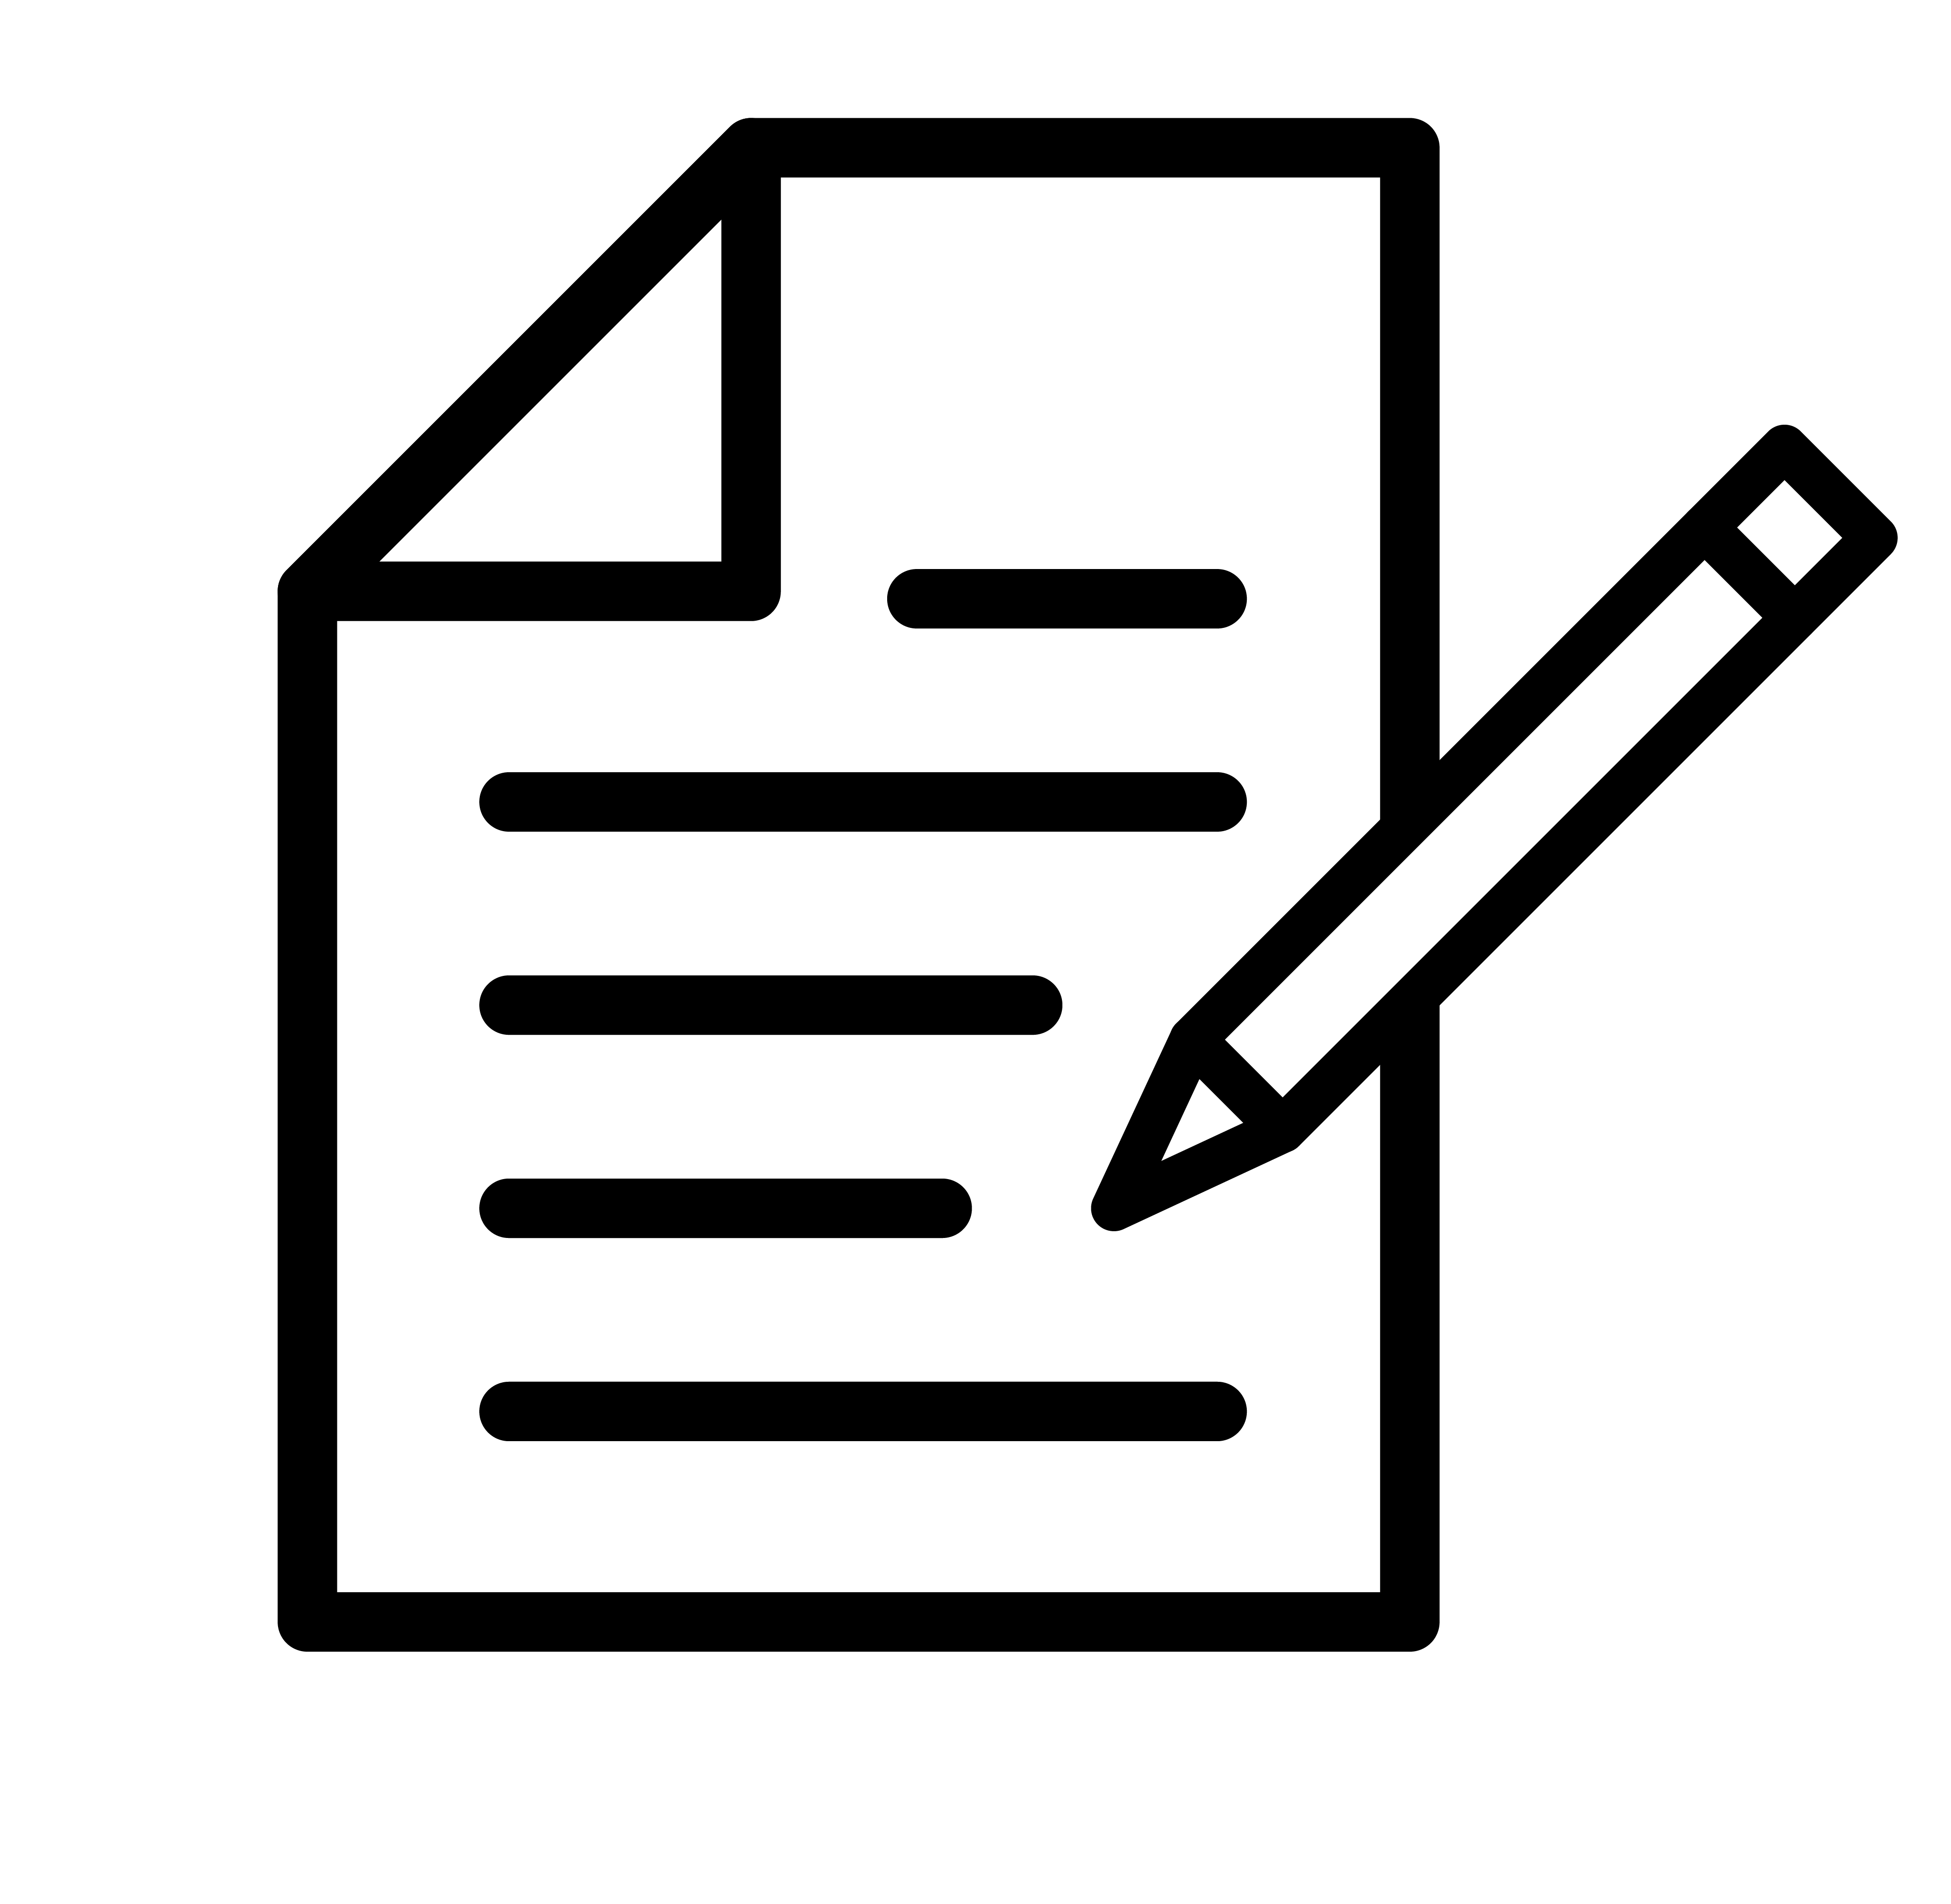 Document with pen icon